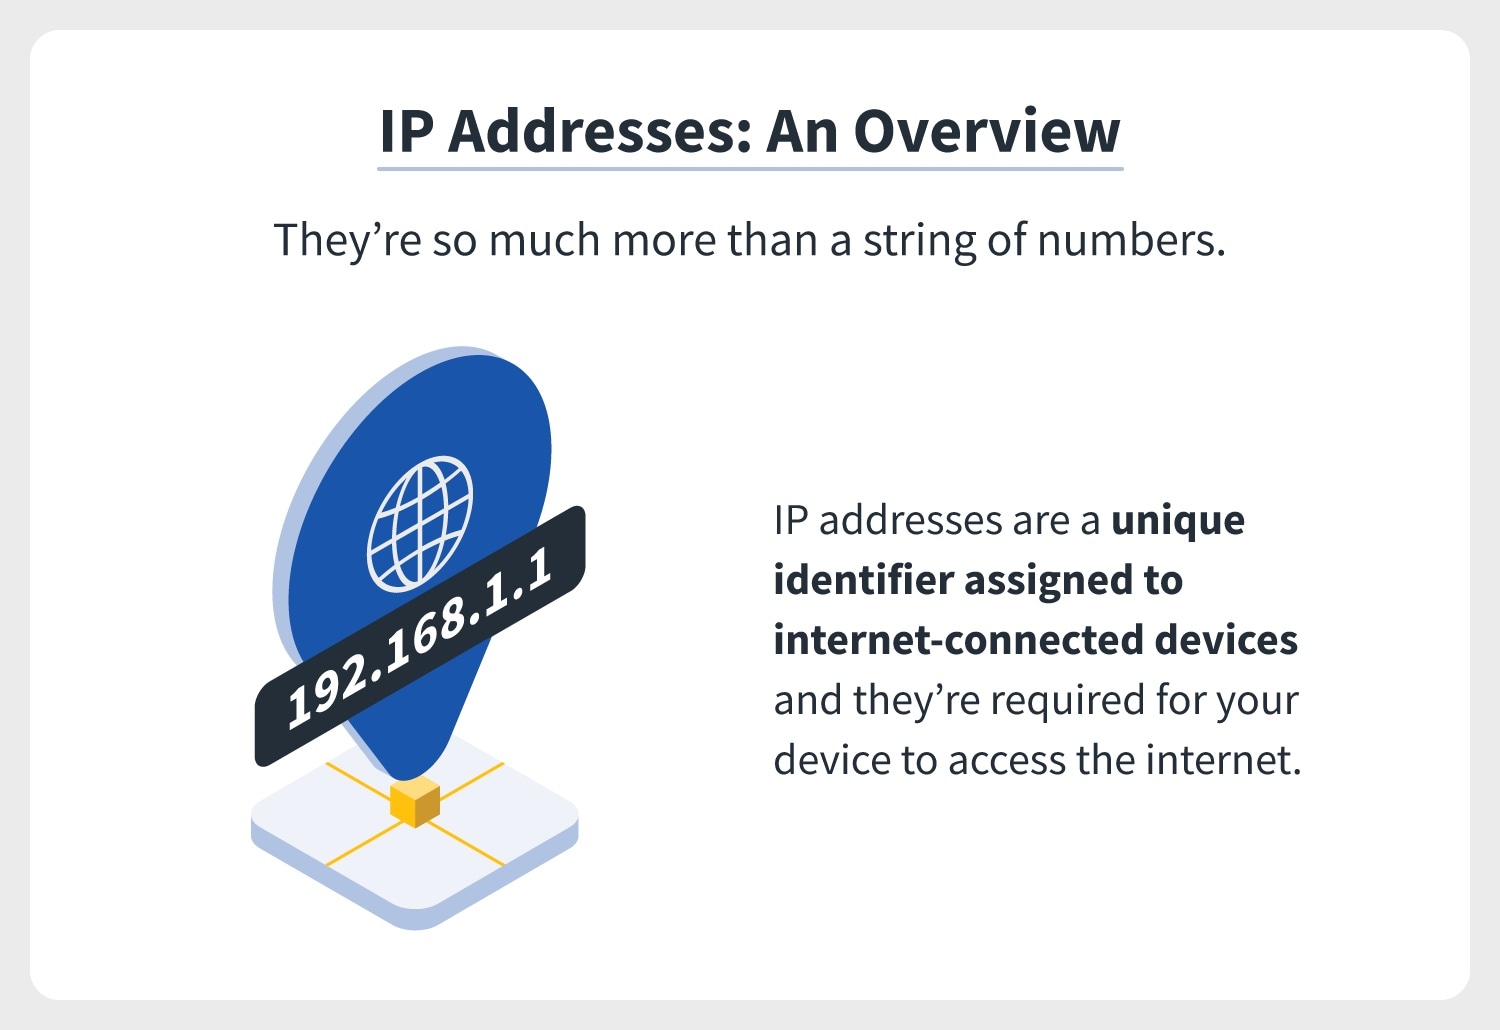 an IP address is written across a geolocation marking, indicating IP addresses reveal online users’ geolocation